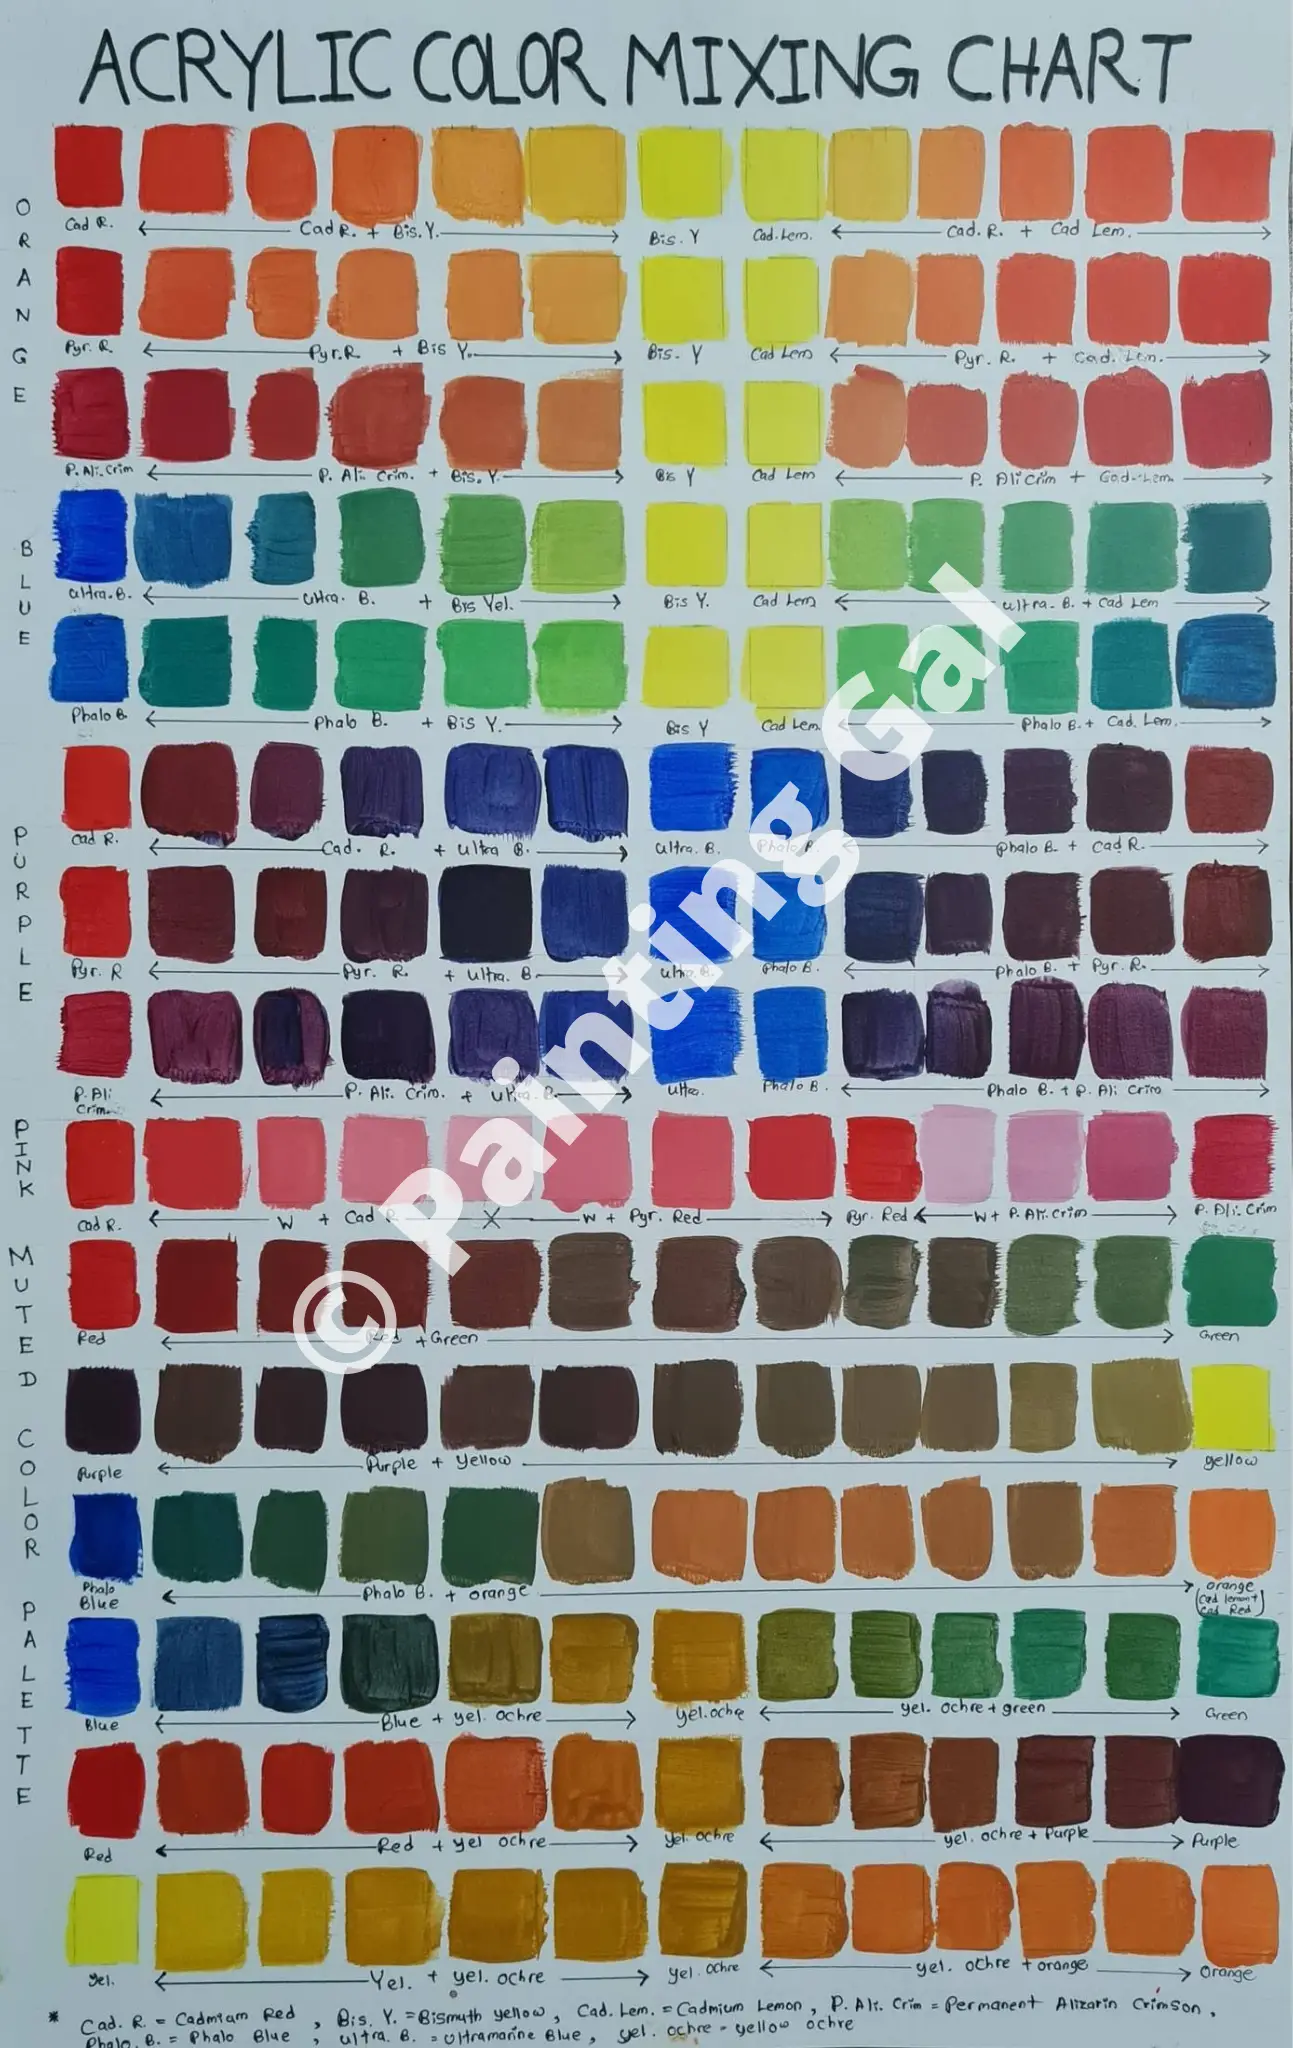 Acrylic paint color mixing chart (with free downloadable)